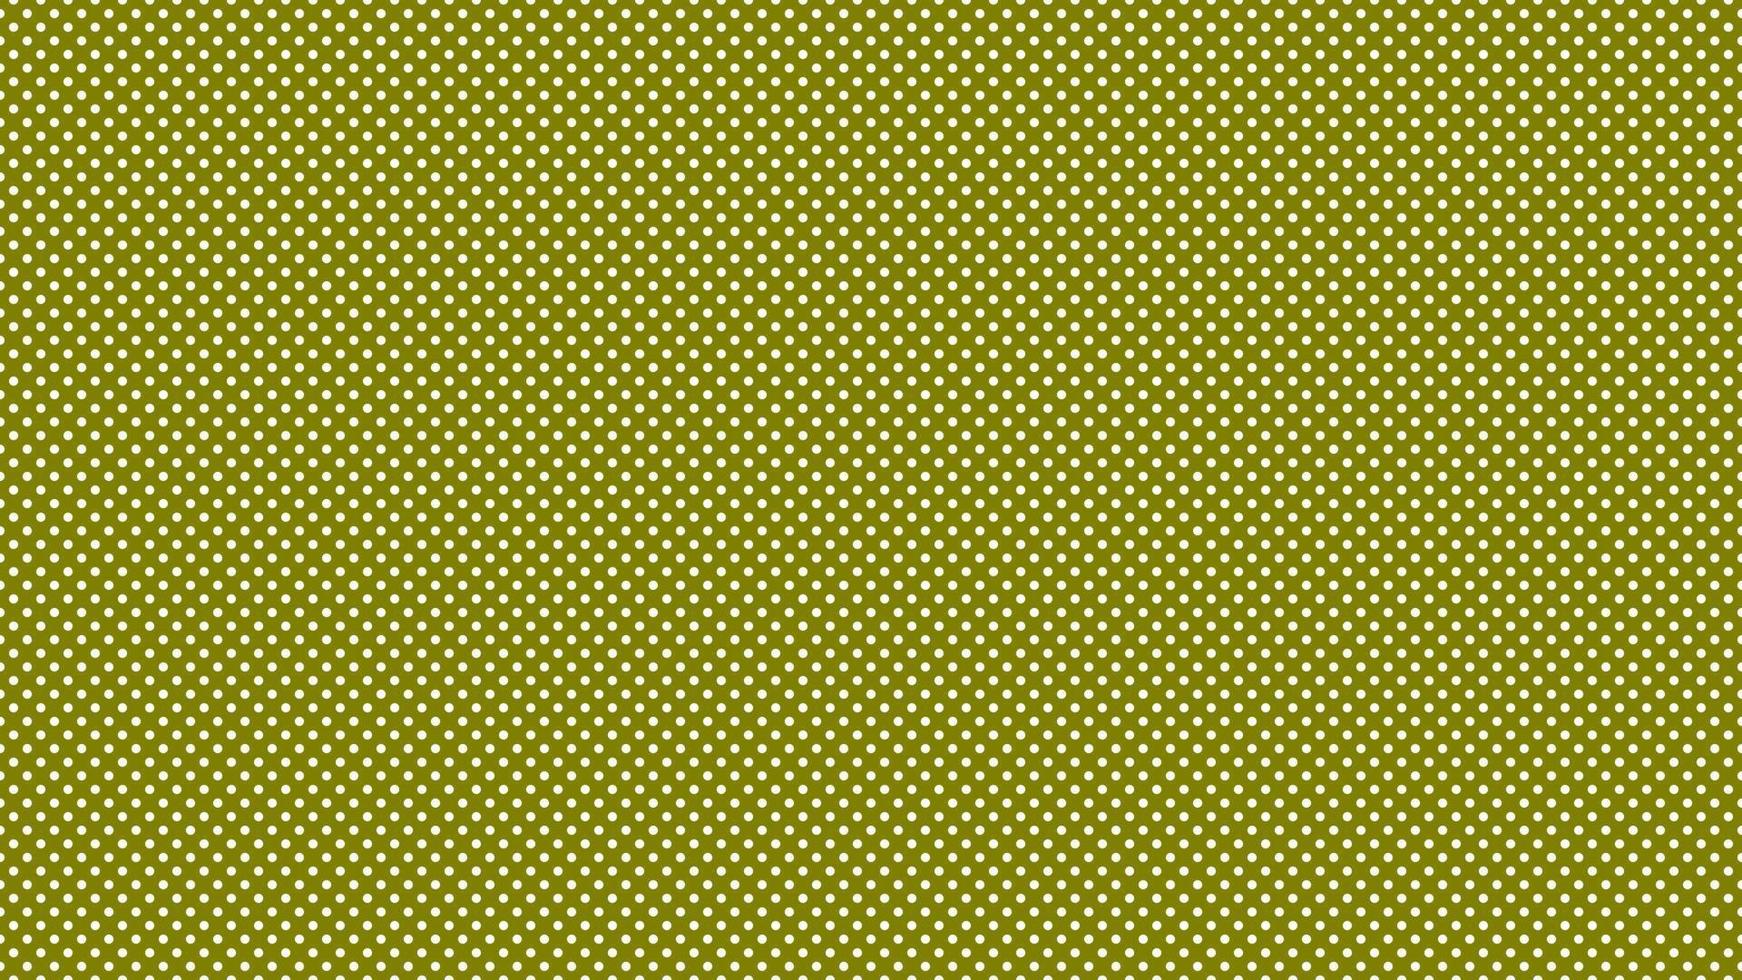 white color polka dots over olive green background vector